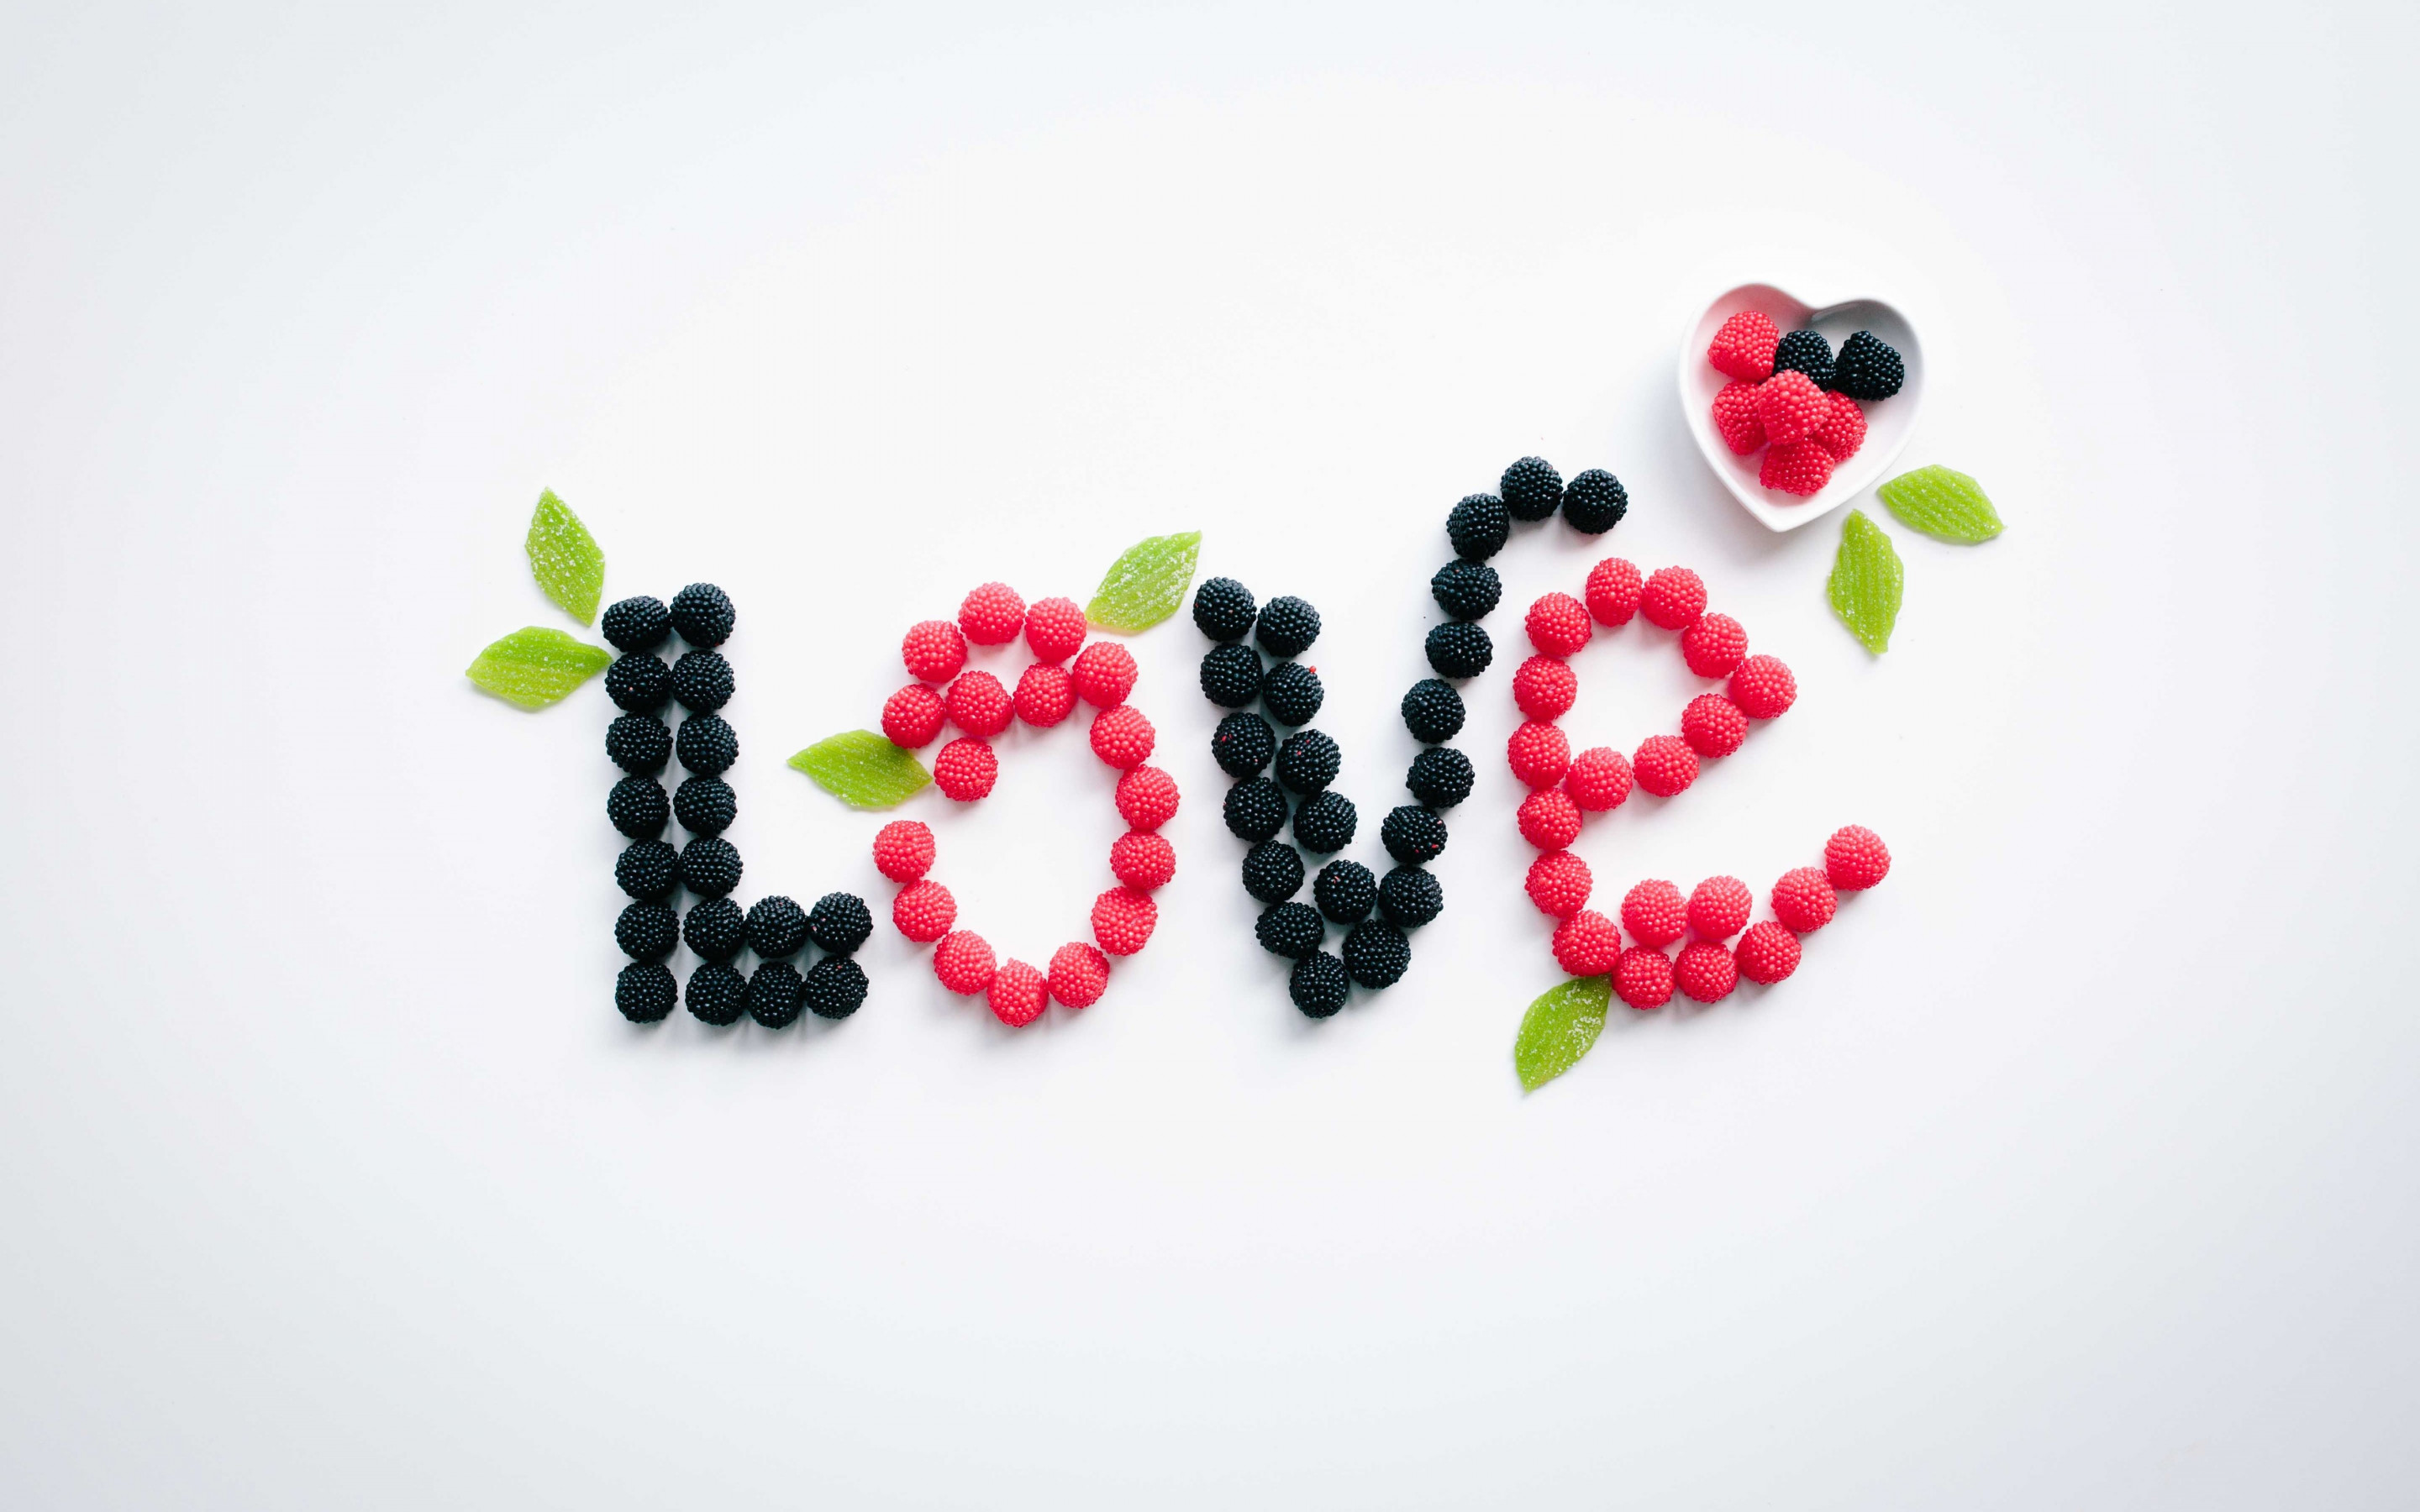 Love message with fruits wallpaper 2880x1800